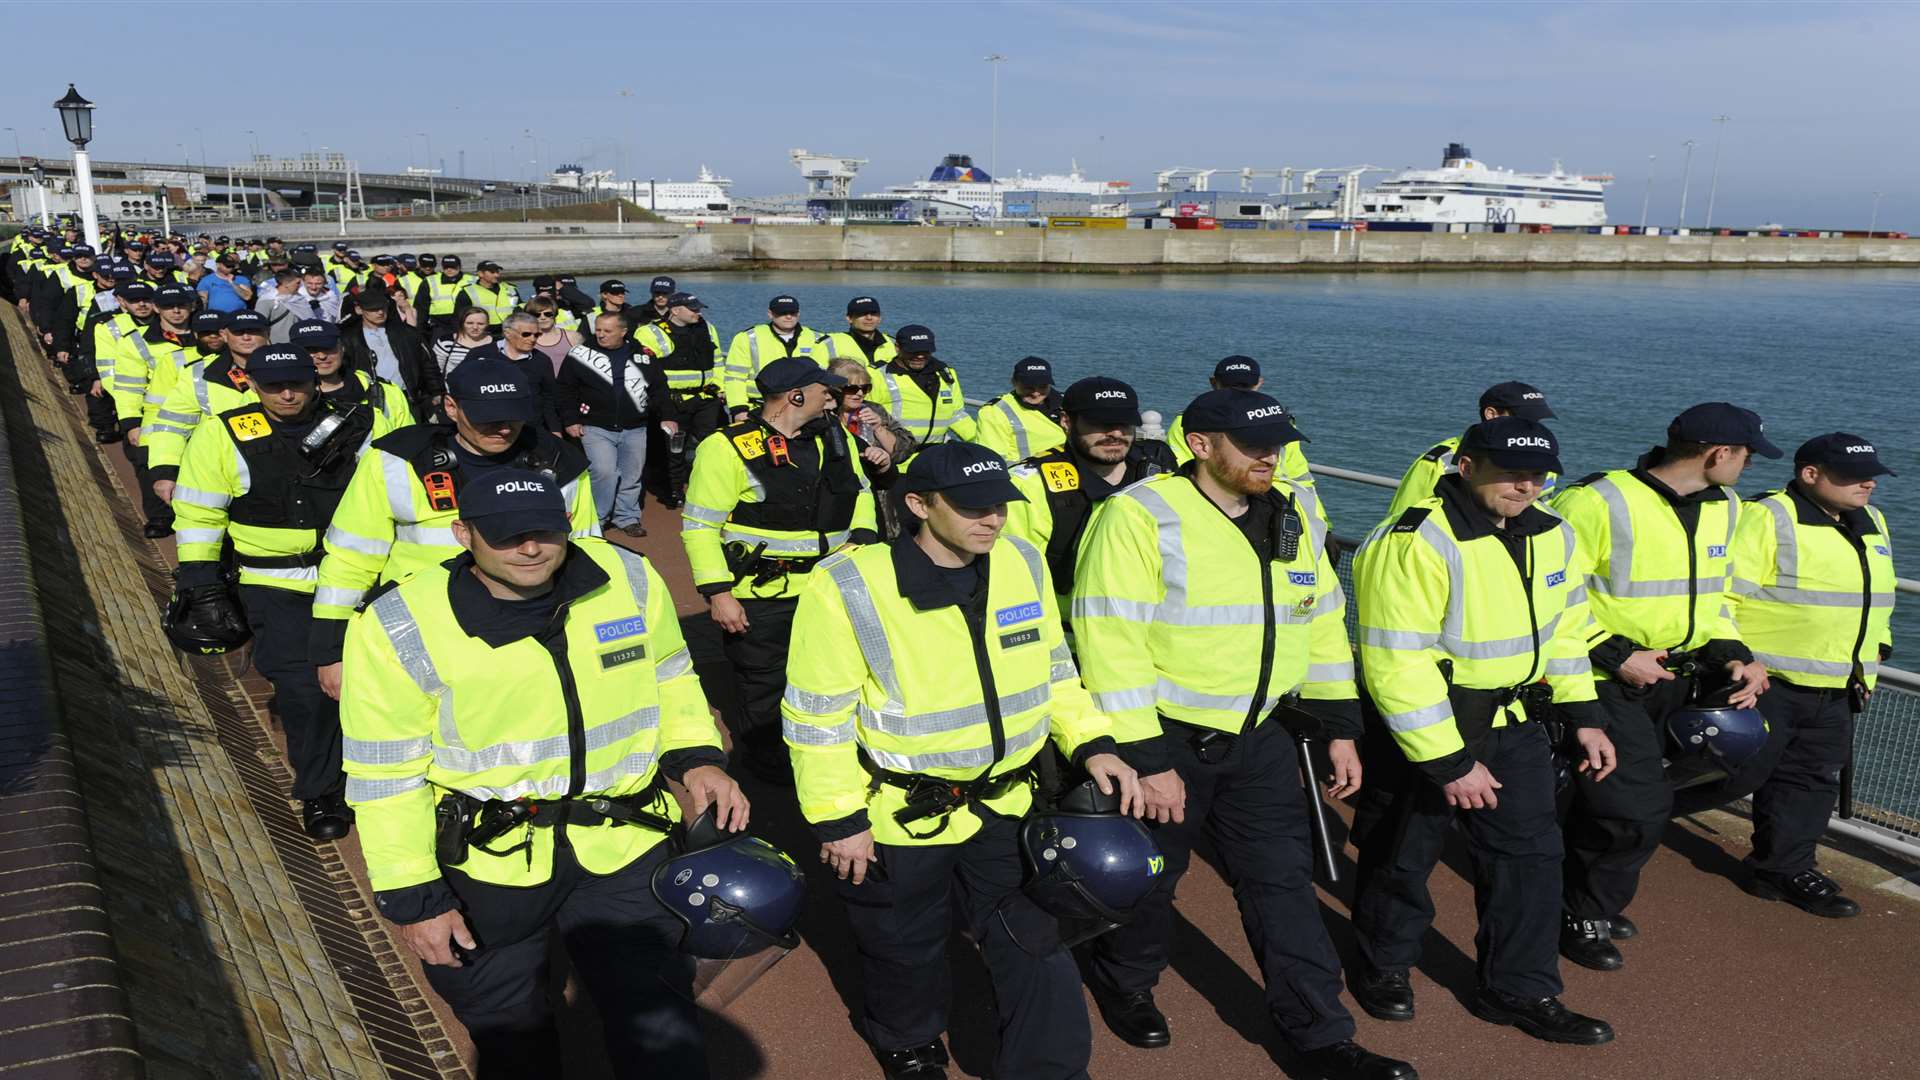 Police led the march in Dover